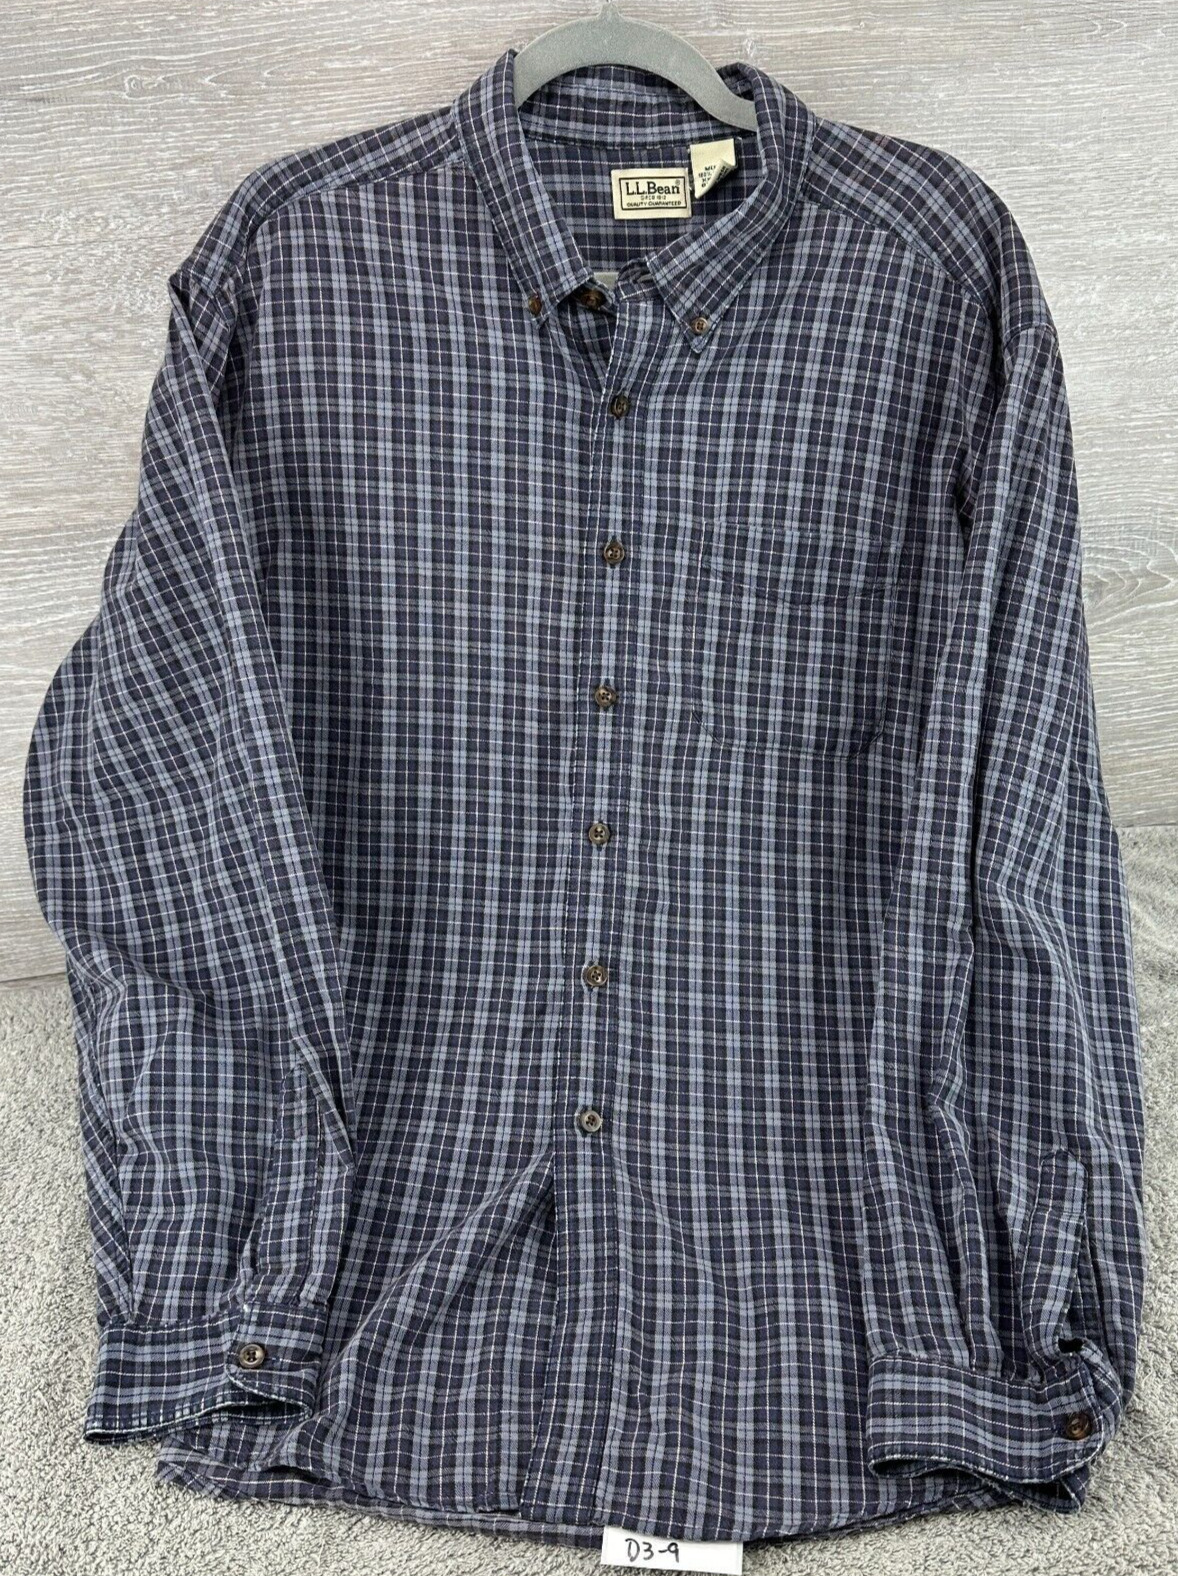 LL Bean Vintage Light Weight Flannel Button Up Sh… - image 1